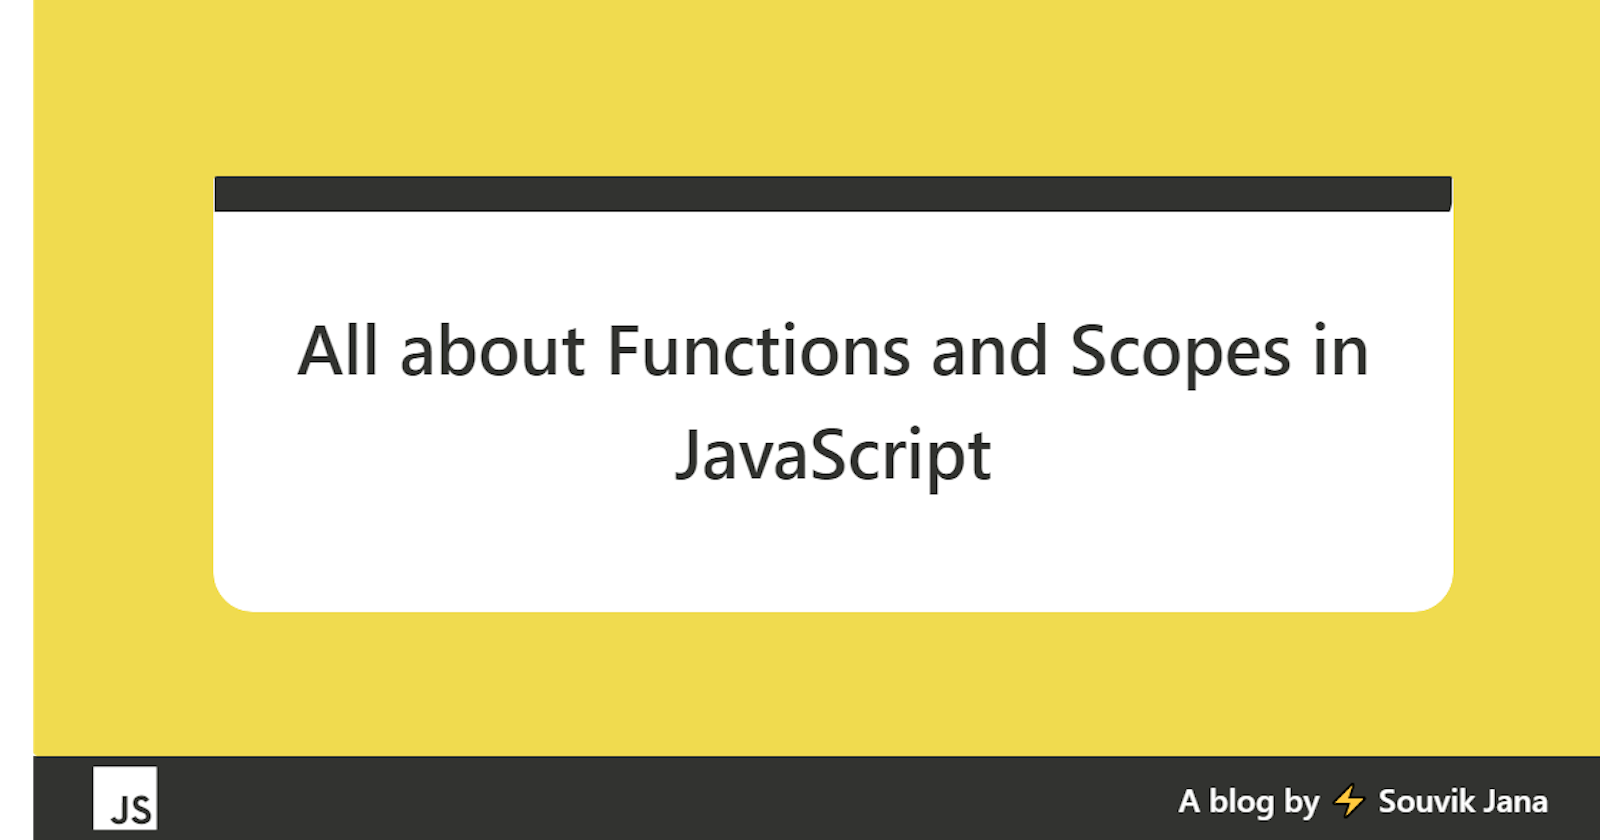 All about Functions and Scopes in JavaScript